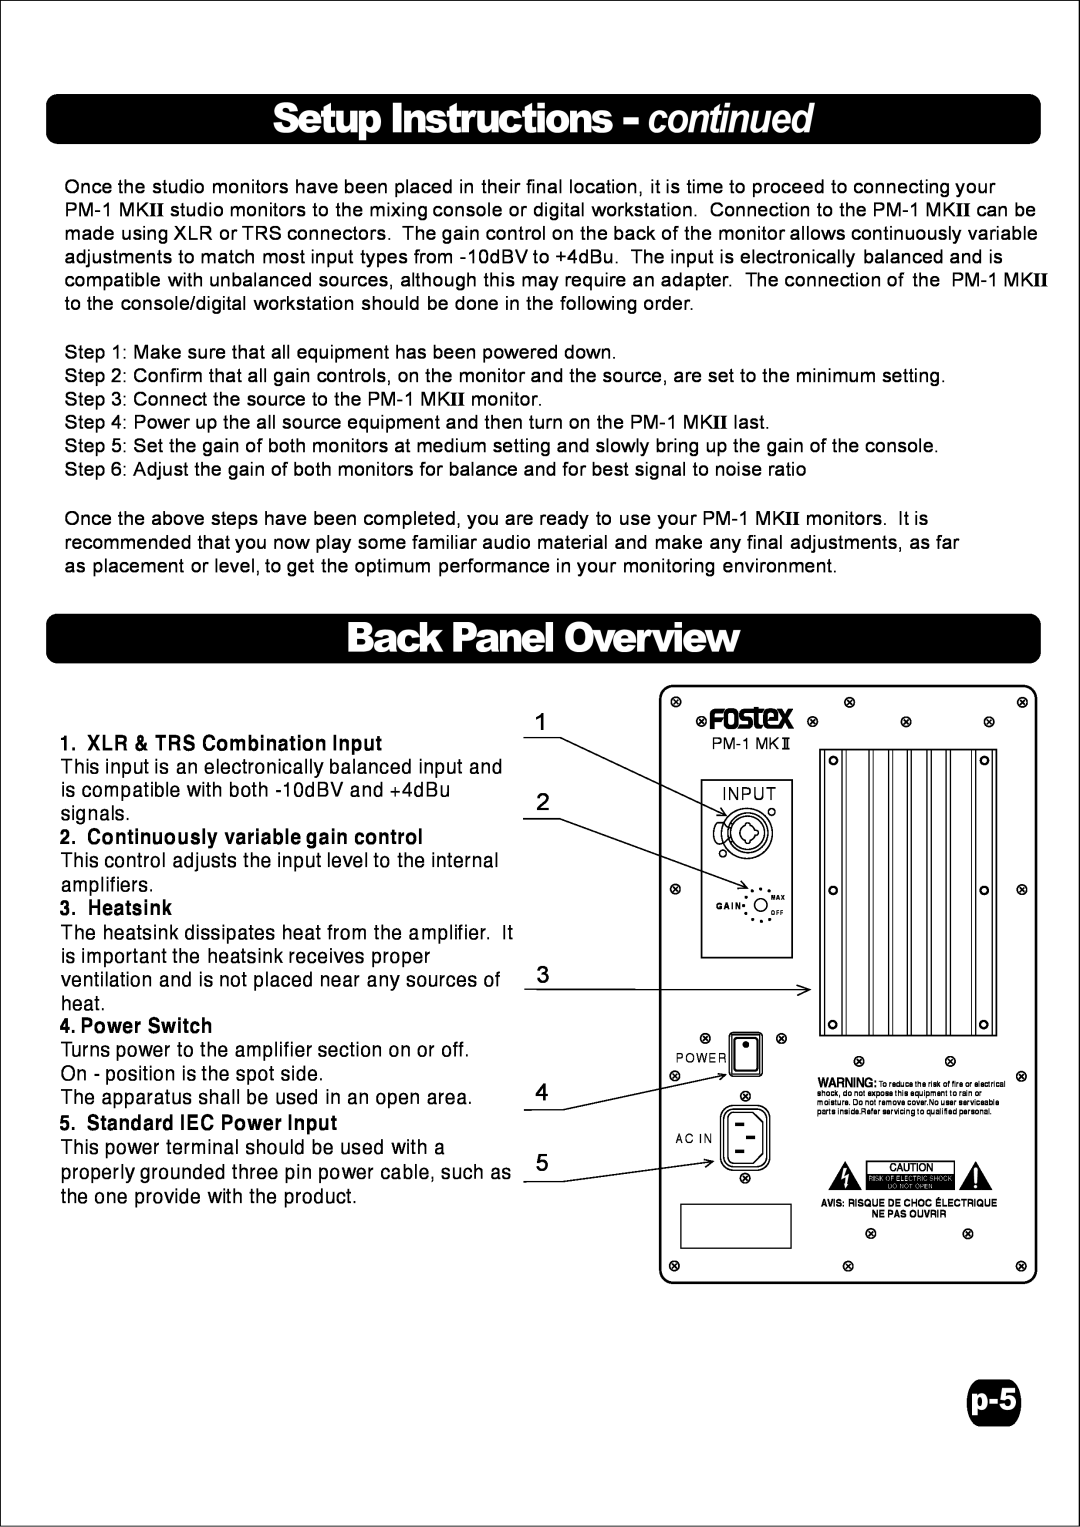 Fostex PM-1MKII Setup Instructions continued, Back Panel Overview, XLR & TRS Combination Input, Heatsink, Power Switch 